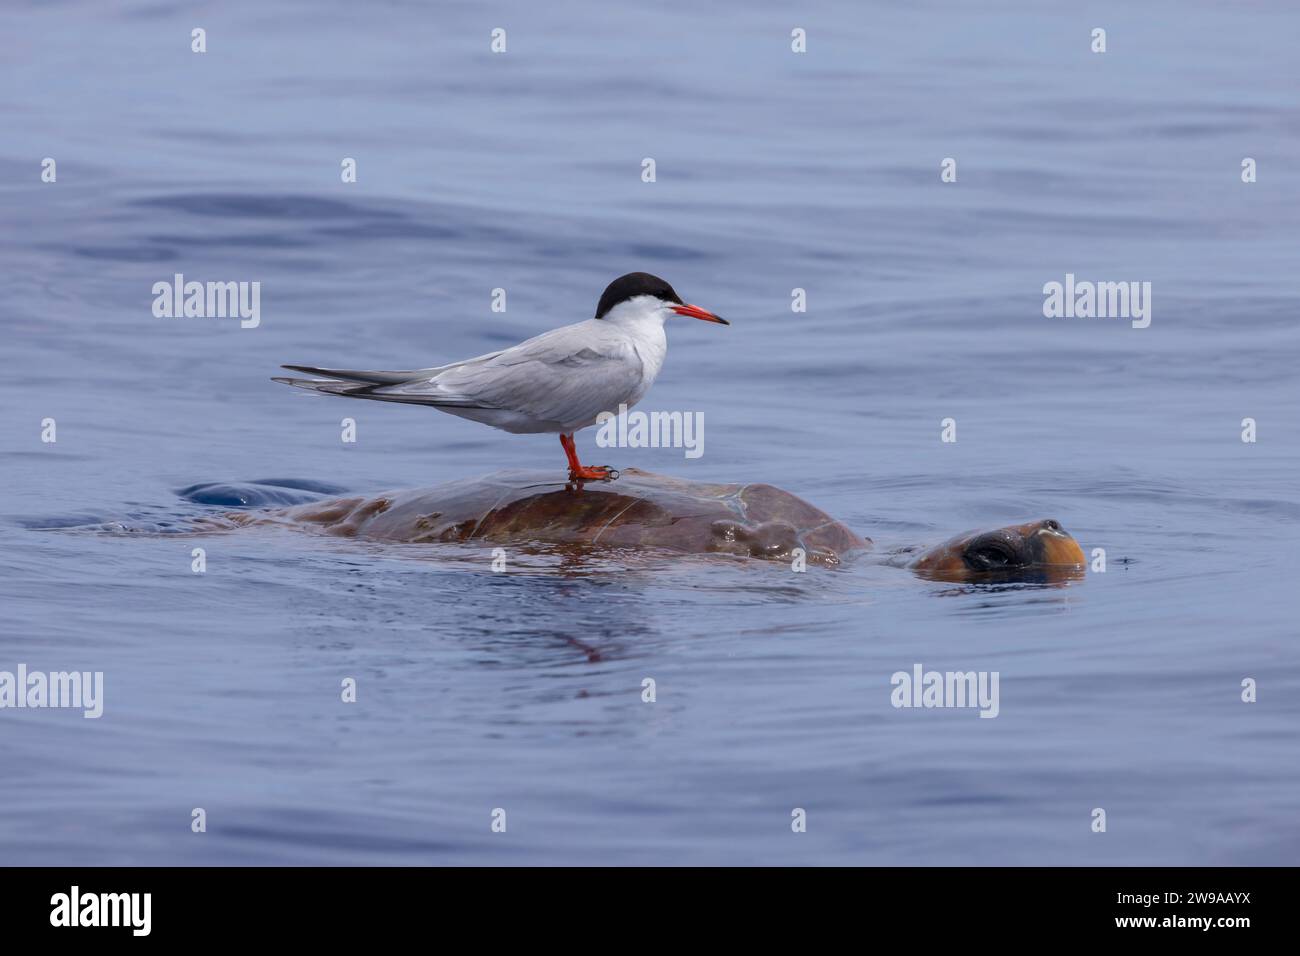 Actic Tern (Sterna paradisaea) riding on a Loggerhead Sea Turtle (Caretta caretta), viewed from a whale watching boat, Azores, Portugal Stock Photo